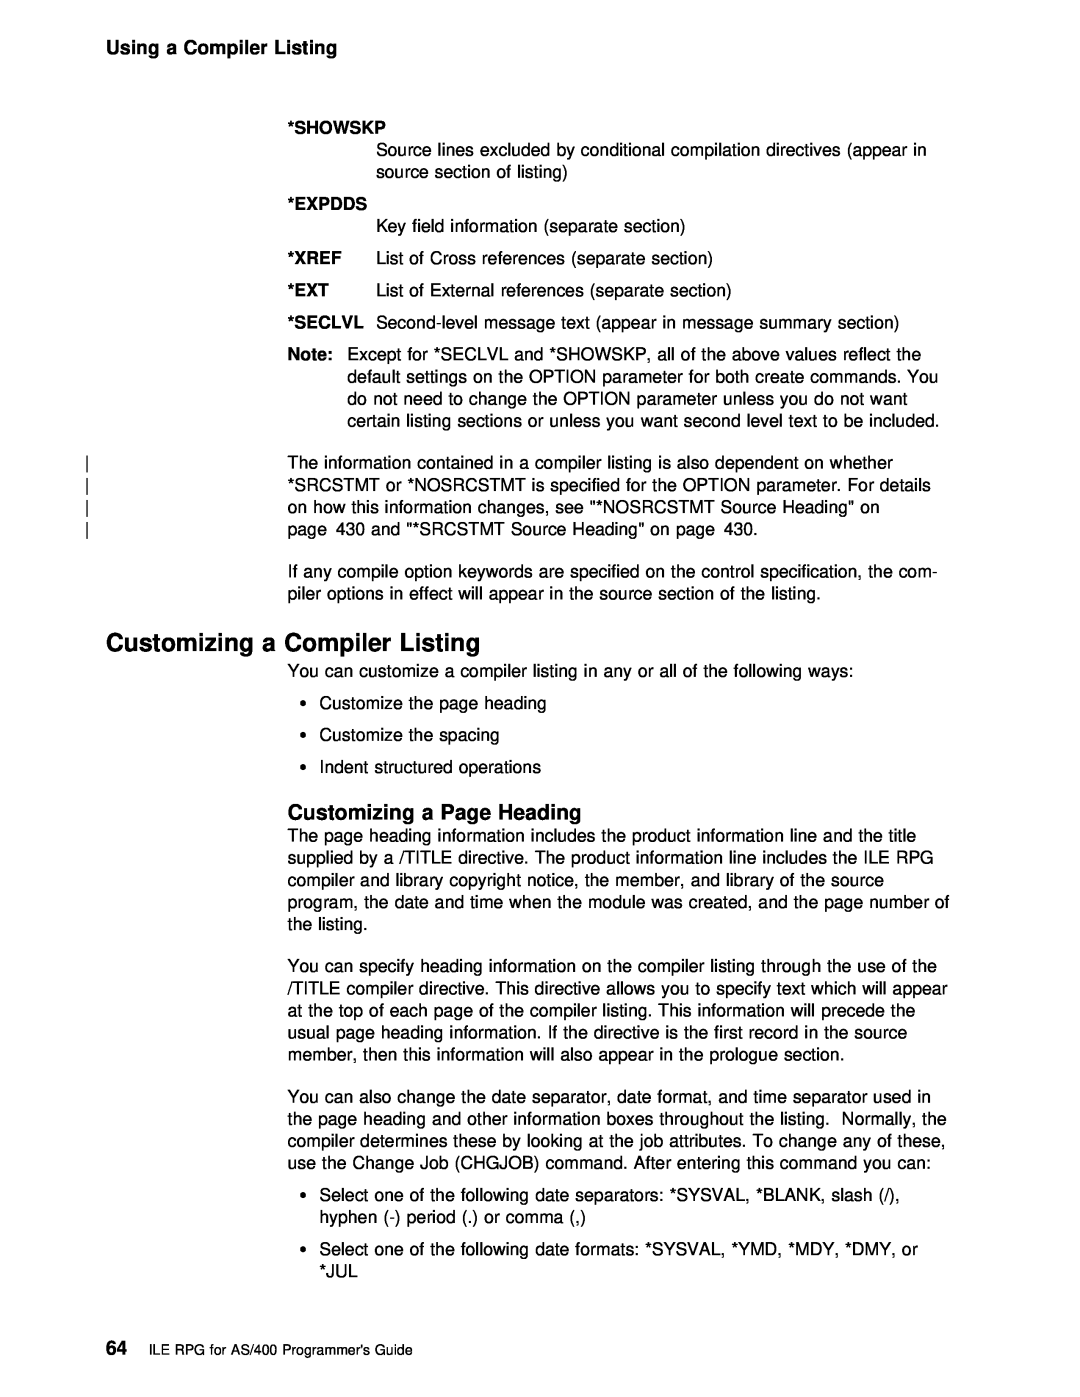 IBM AS/400 manual Customizing a Compiler Listing, Customizing a Page Heading, Using 